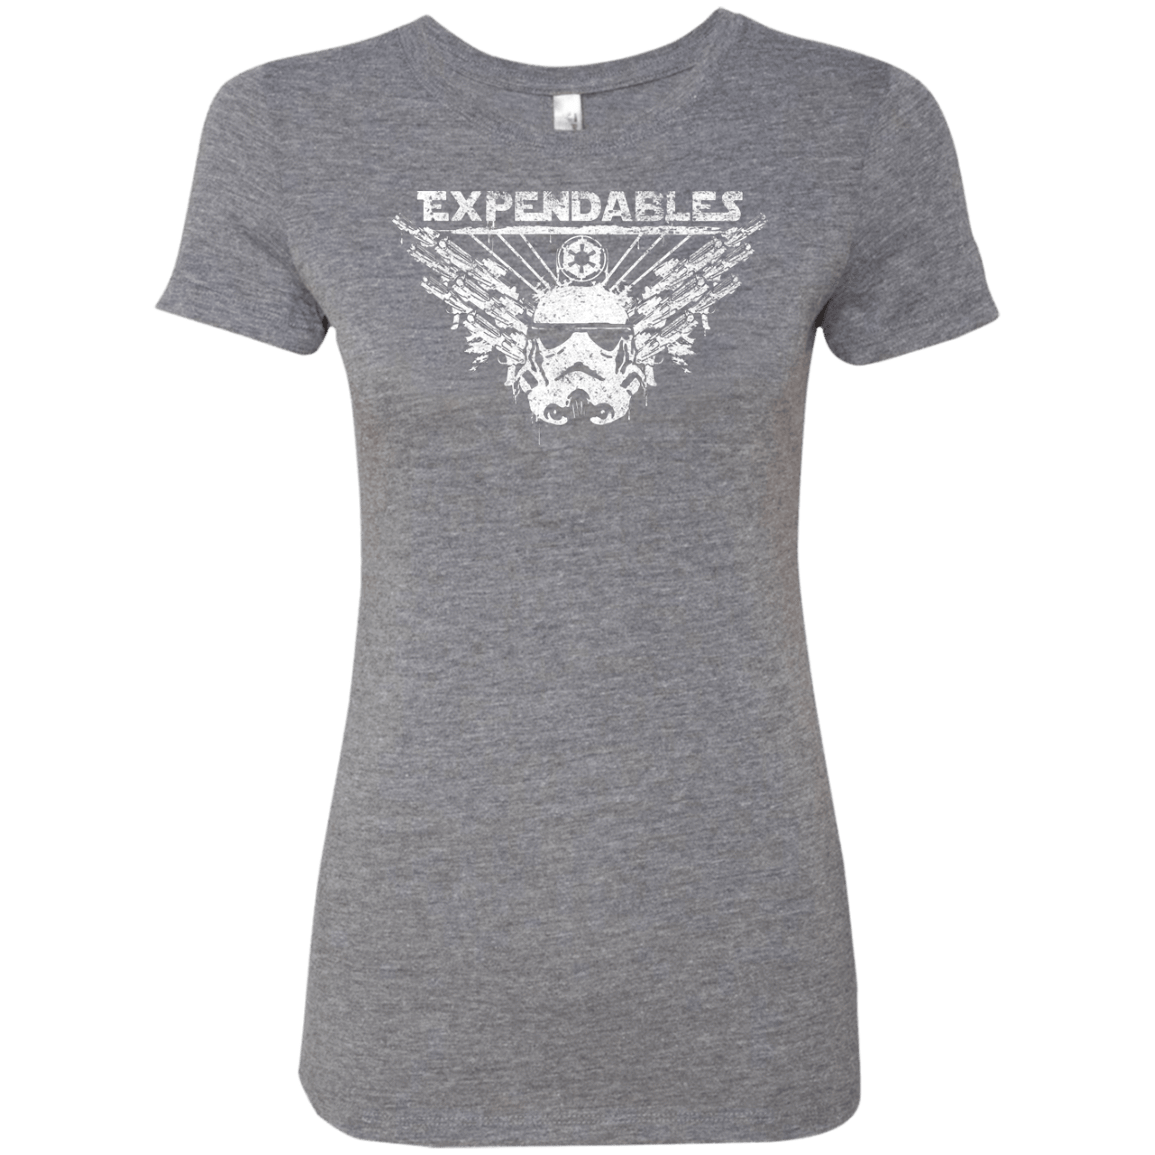 T-Shirts Premium Heather / S Expendable Troopers Women's Triblend T-Shirt